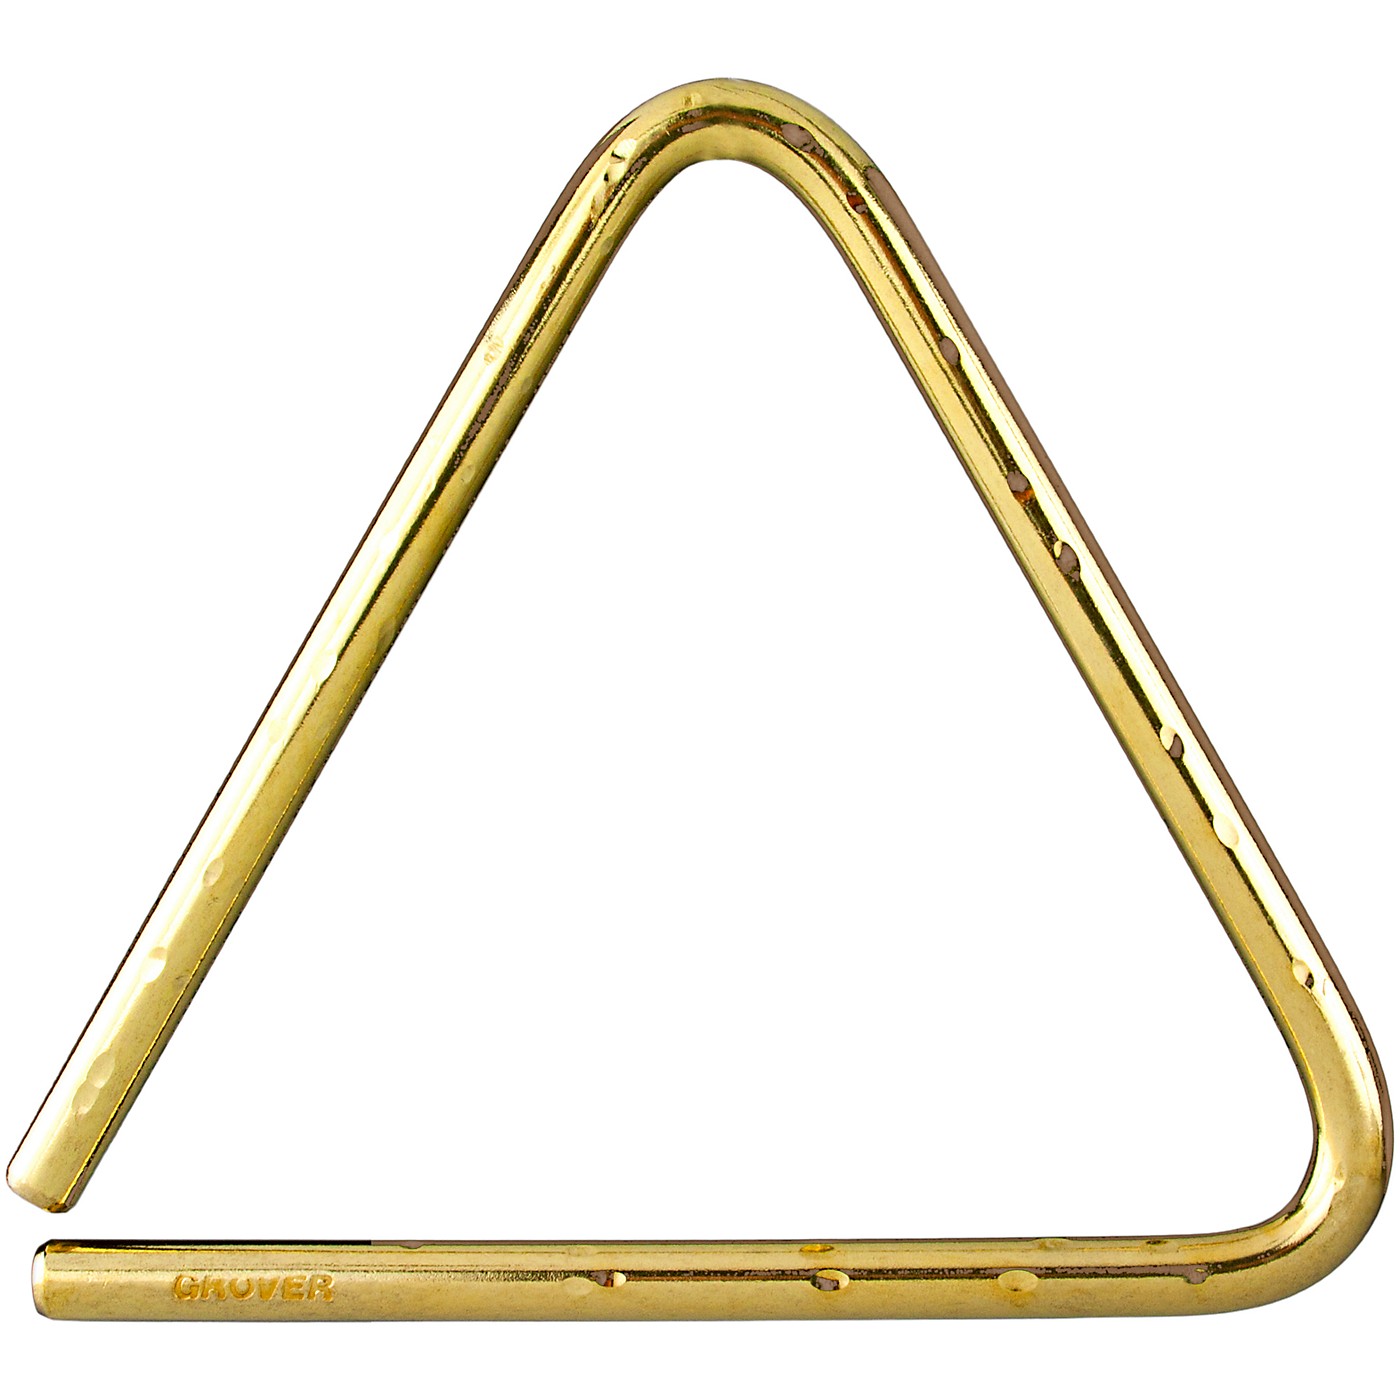 Grover Pro Bronze Hammered Lite Symphonic Triangle thumbnail